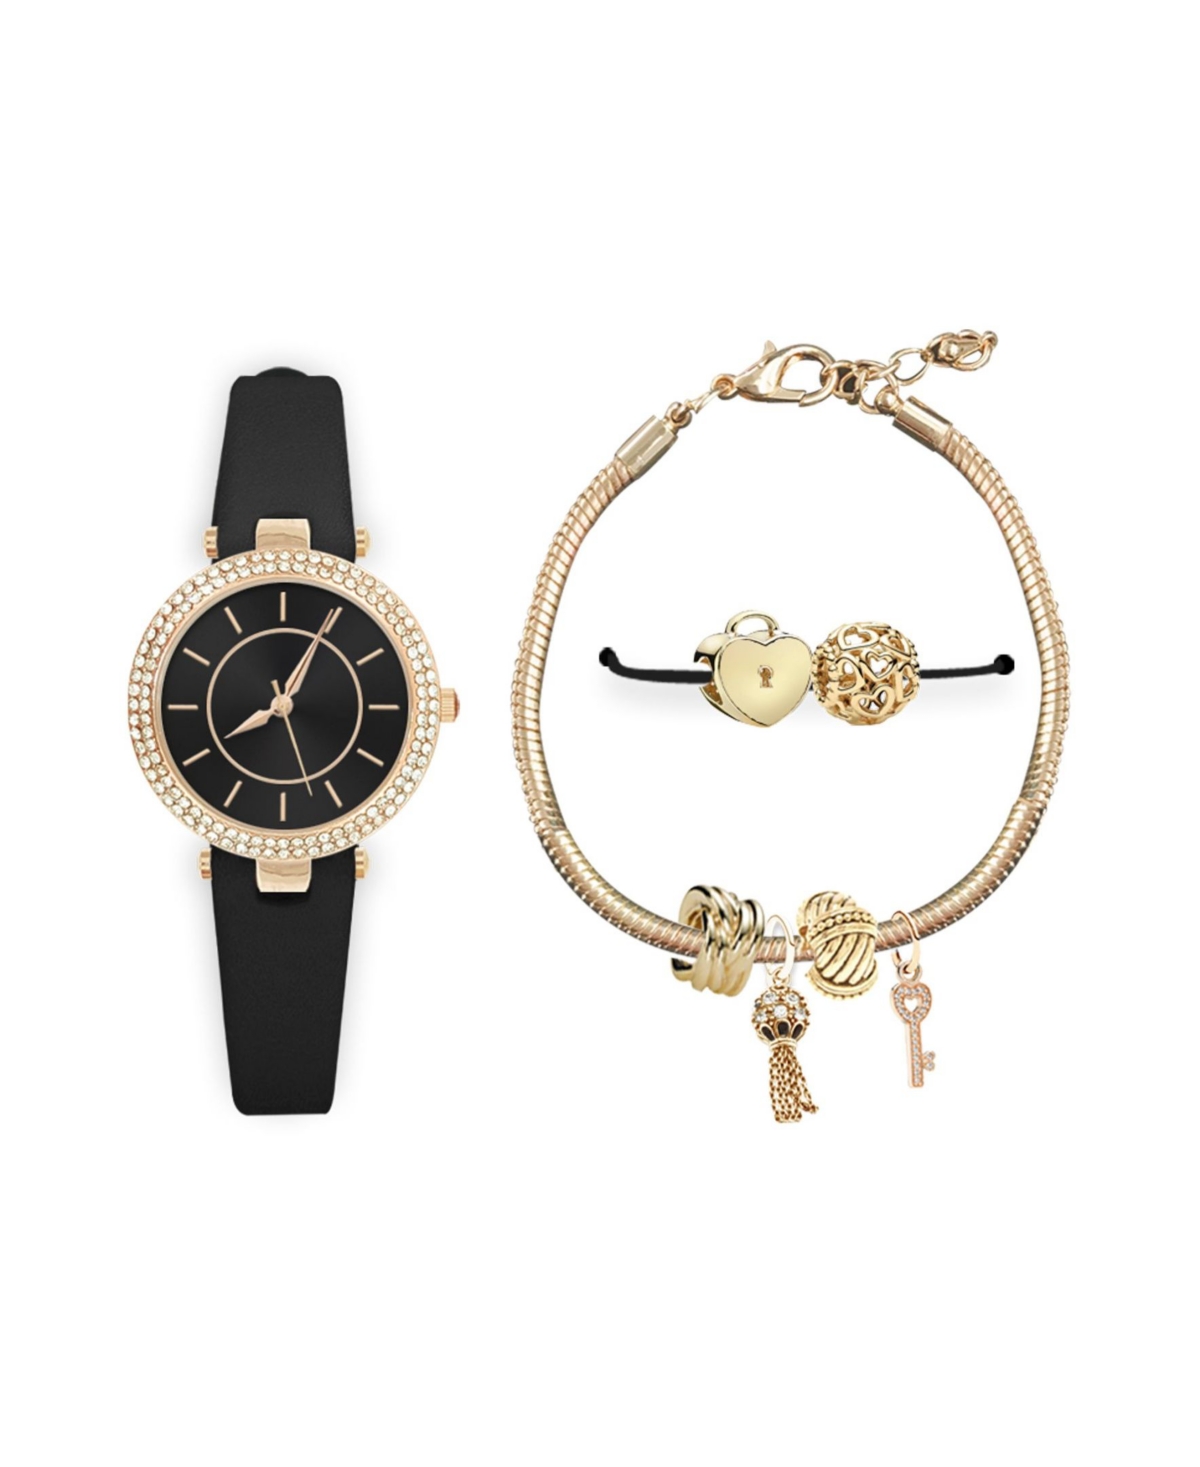 American Exchange Women's Black Strap Analog Watch 26mm with Glam Gold-Tone Hearts and Keys Bracelet Cubic Zirconia Gift Set